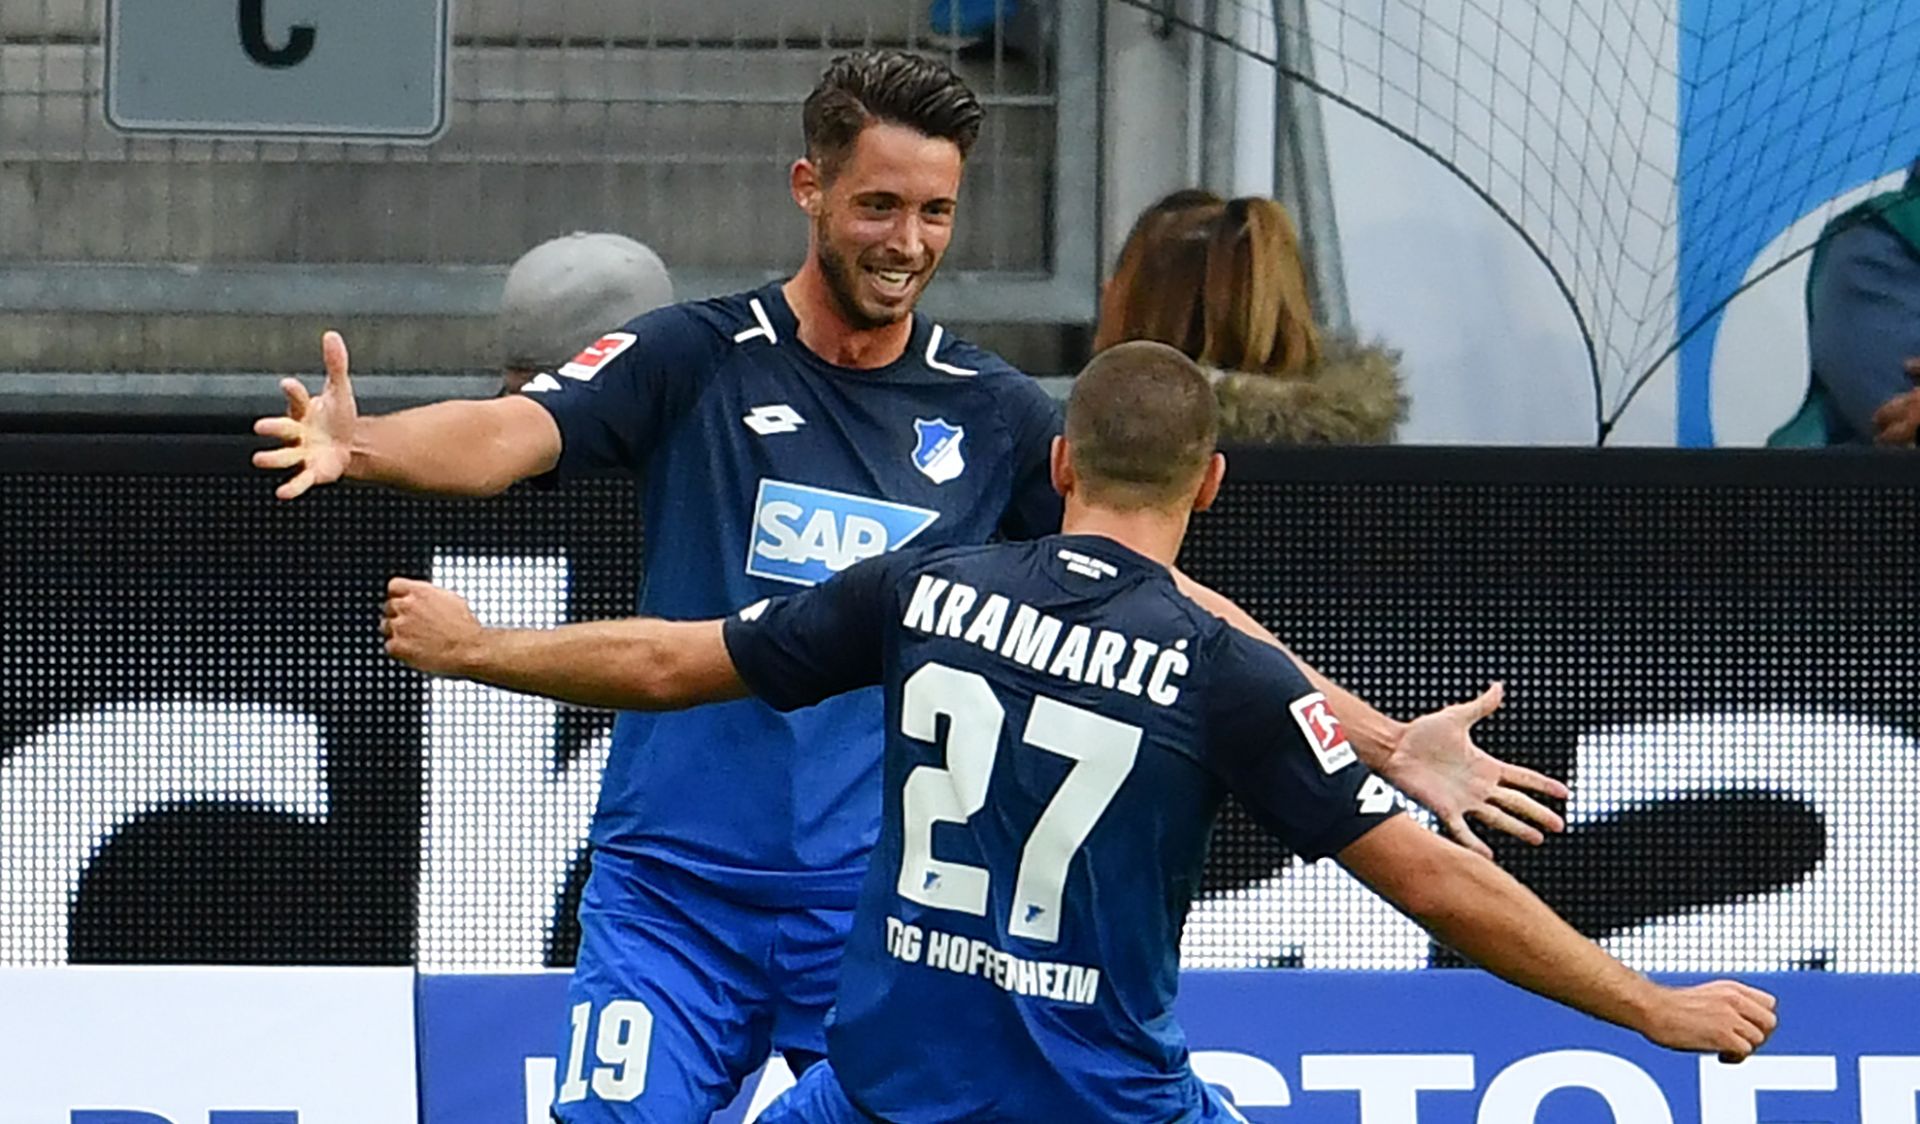 Hoffenheim's Mark Uth (l) celebrates his 1:0 goal with team colleague Andrej Kramaric  during the German Bundesliga soccer match between 1899 Hoffenheim and Bayern Munich at the Rhein-Neckar-Arena in Sinsheim, Germany, 9 September 2017.



(EMBARGO CONDITIONS - ATTENTION: Due to the accreditation guidlines, the DFL only permits the publication and utilisation of up to 15 pictures per match on the internet and in online media during the match.) Photo: Hasan Bratic/dpa